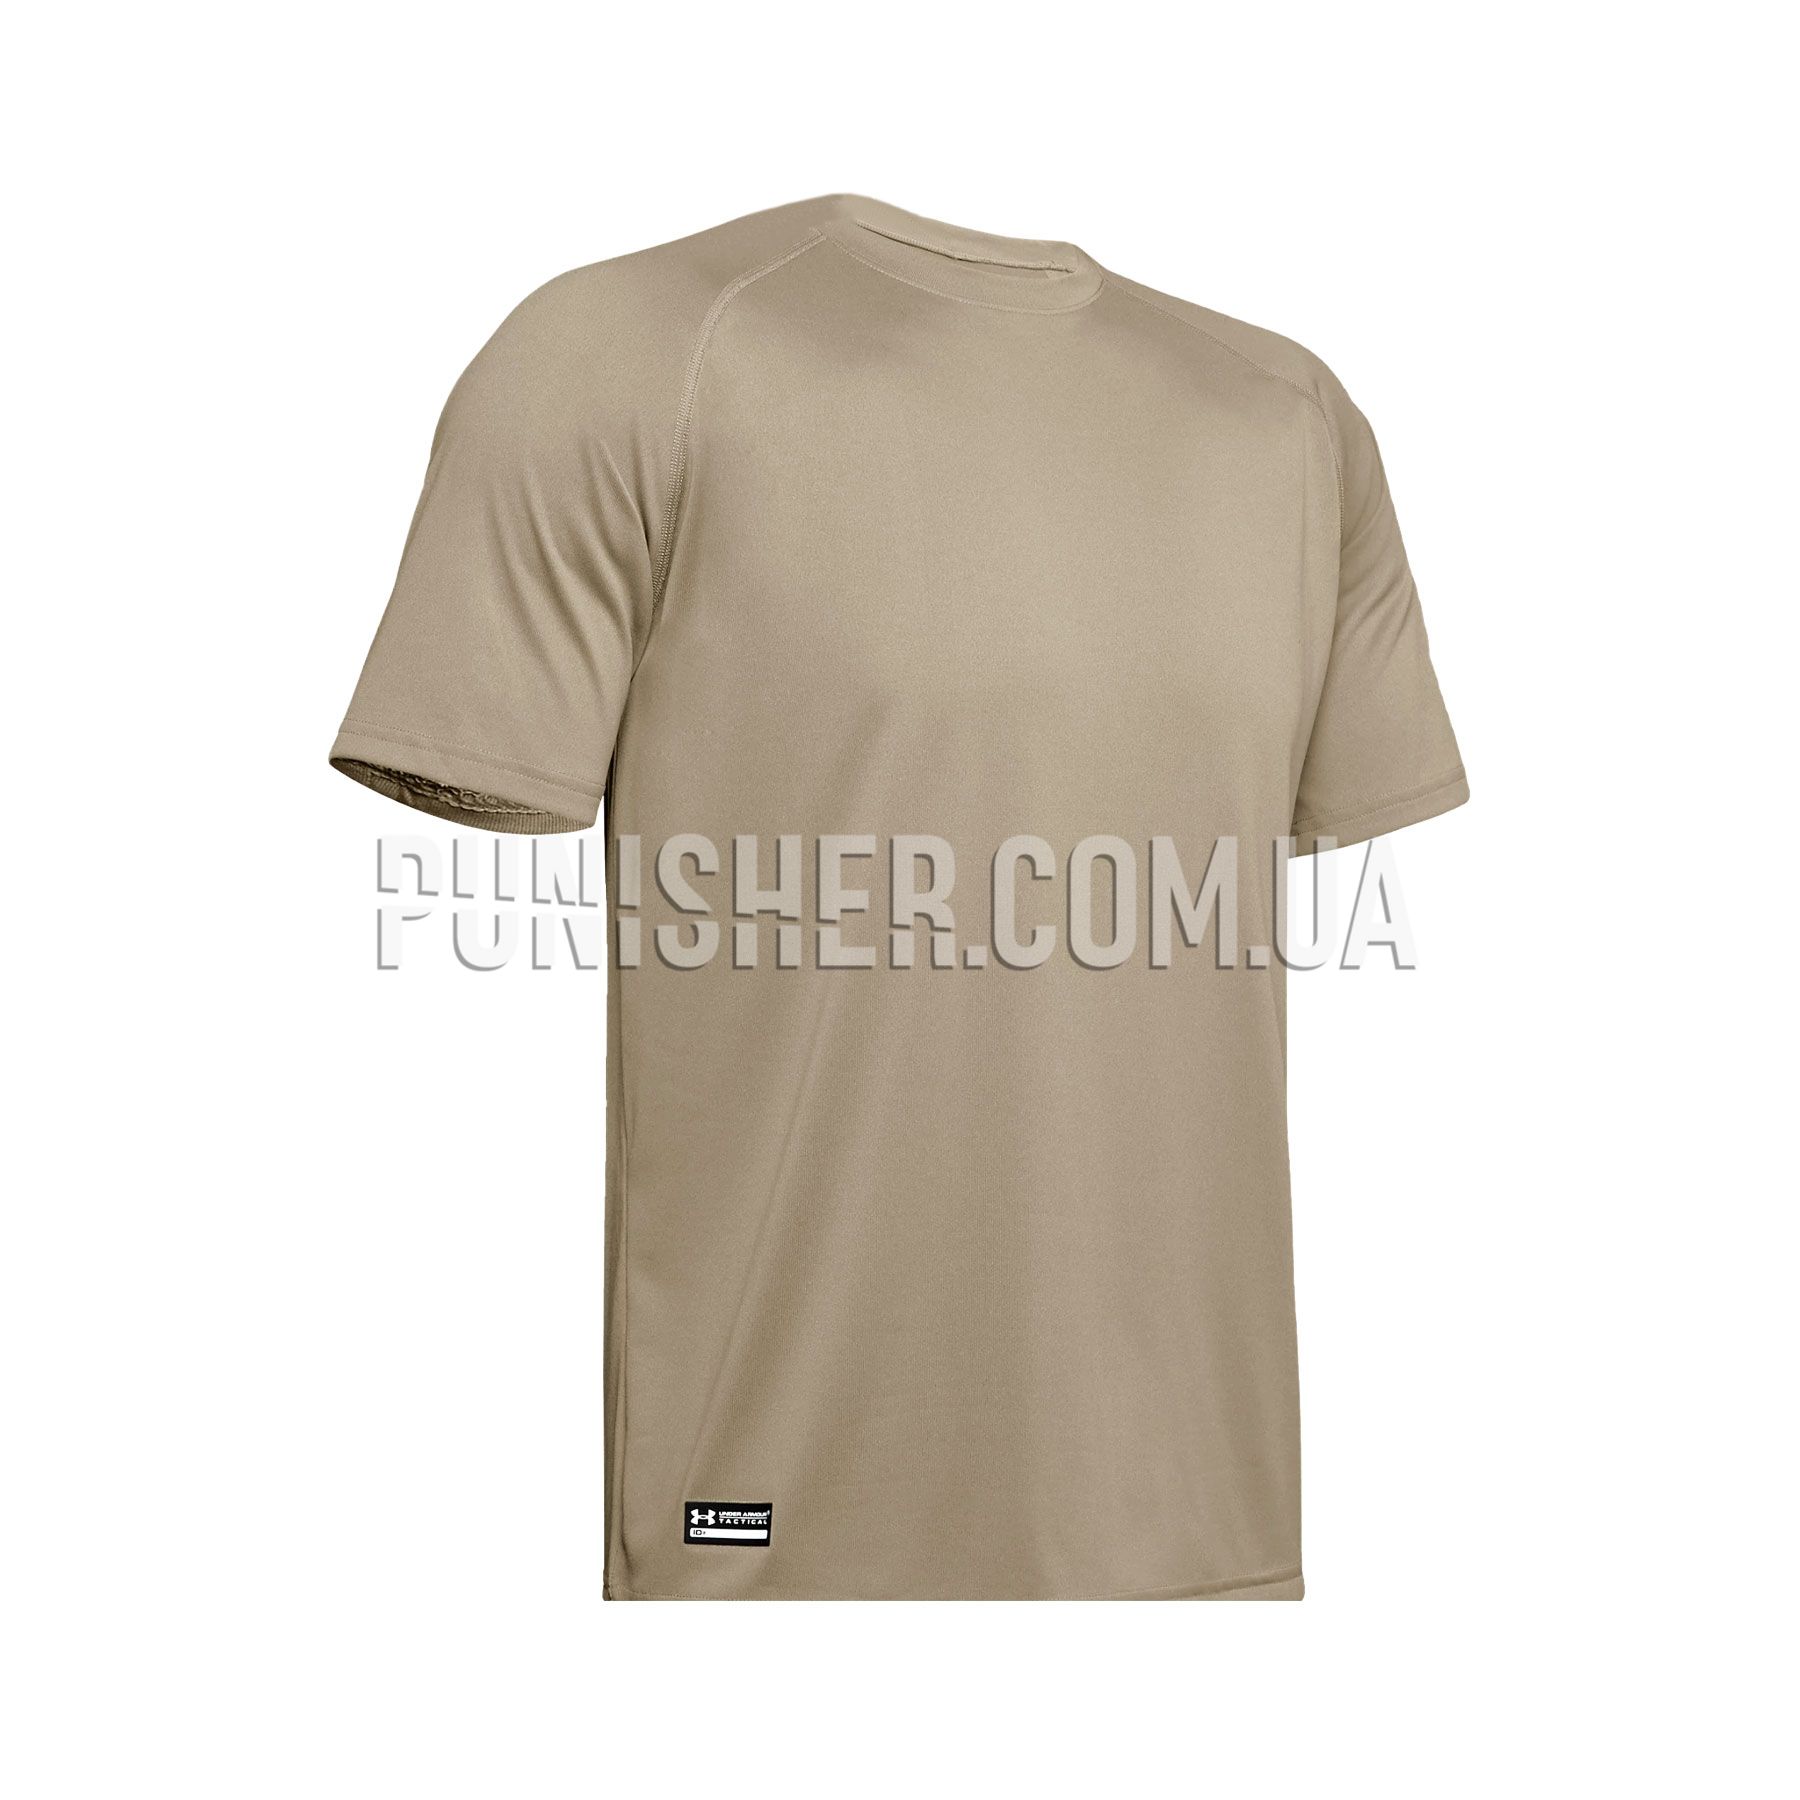 Under Armour Tactical T-Shirt Tan buy with international delivery